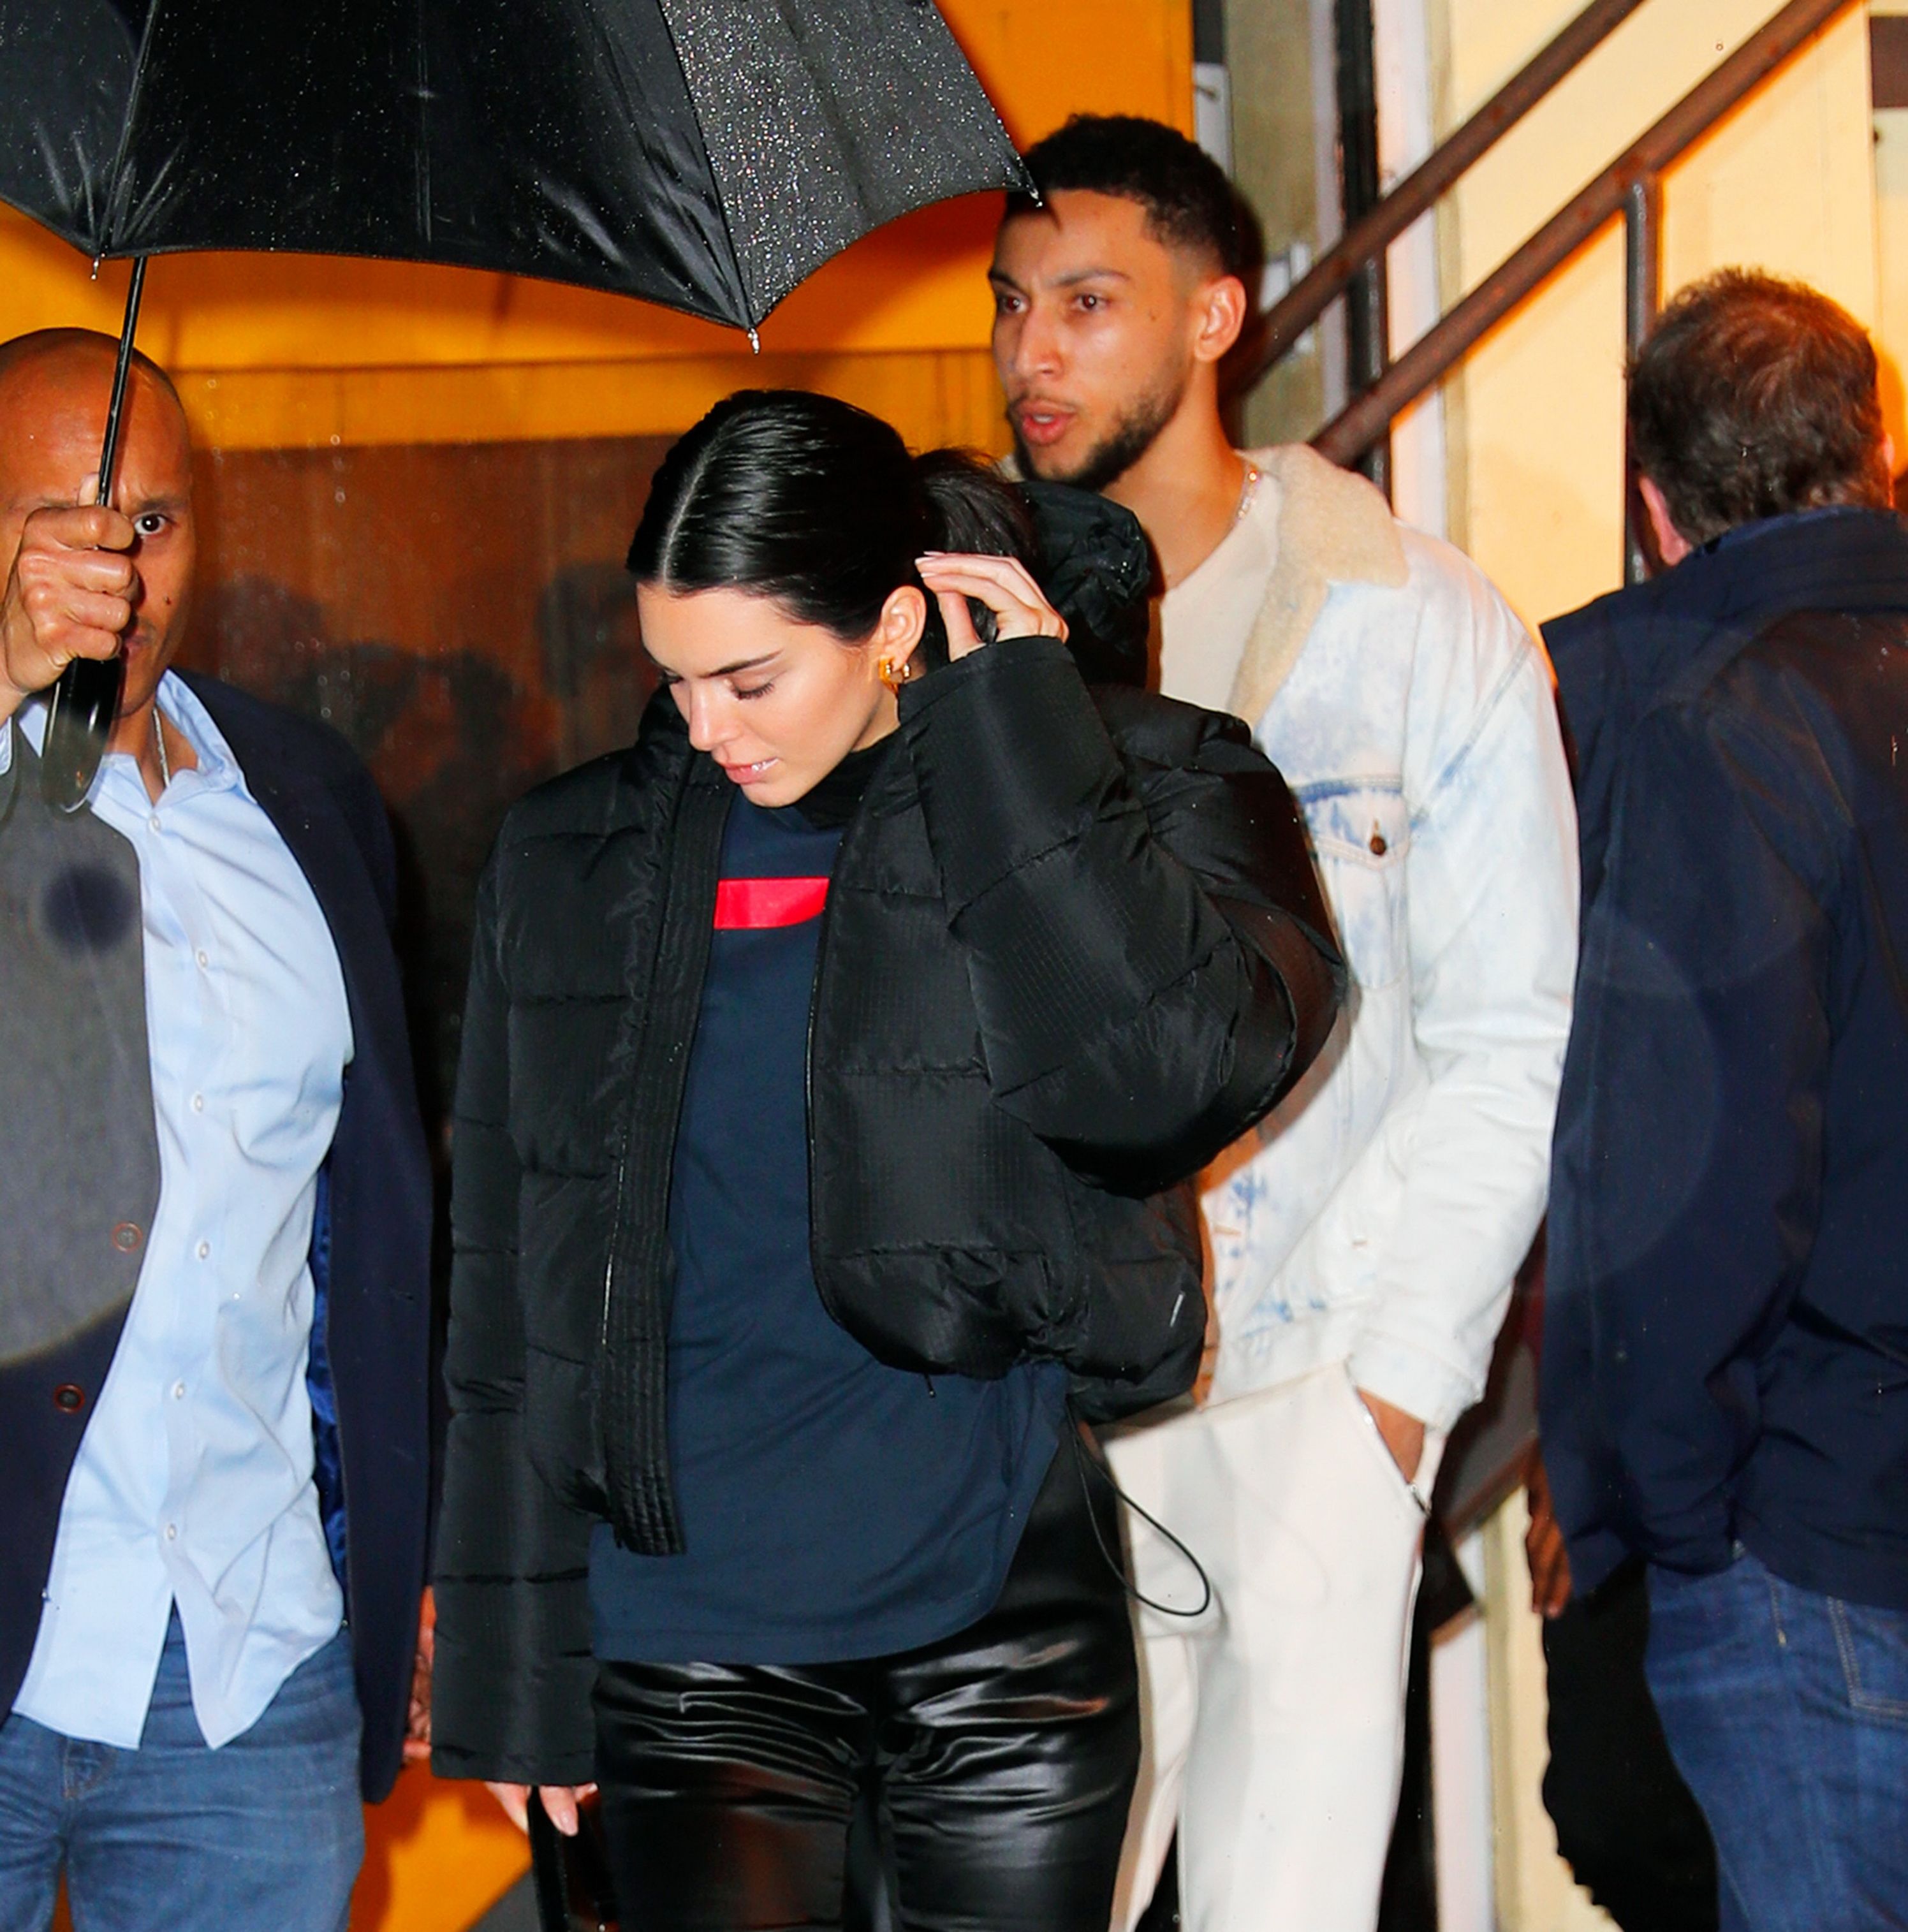 An Official Timeline Of Kendall Jenner and Ben Simmons’ ‘Casual